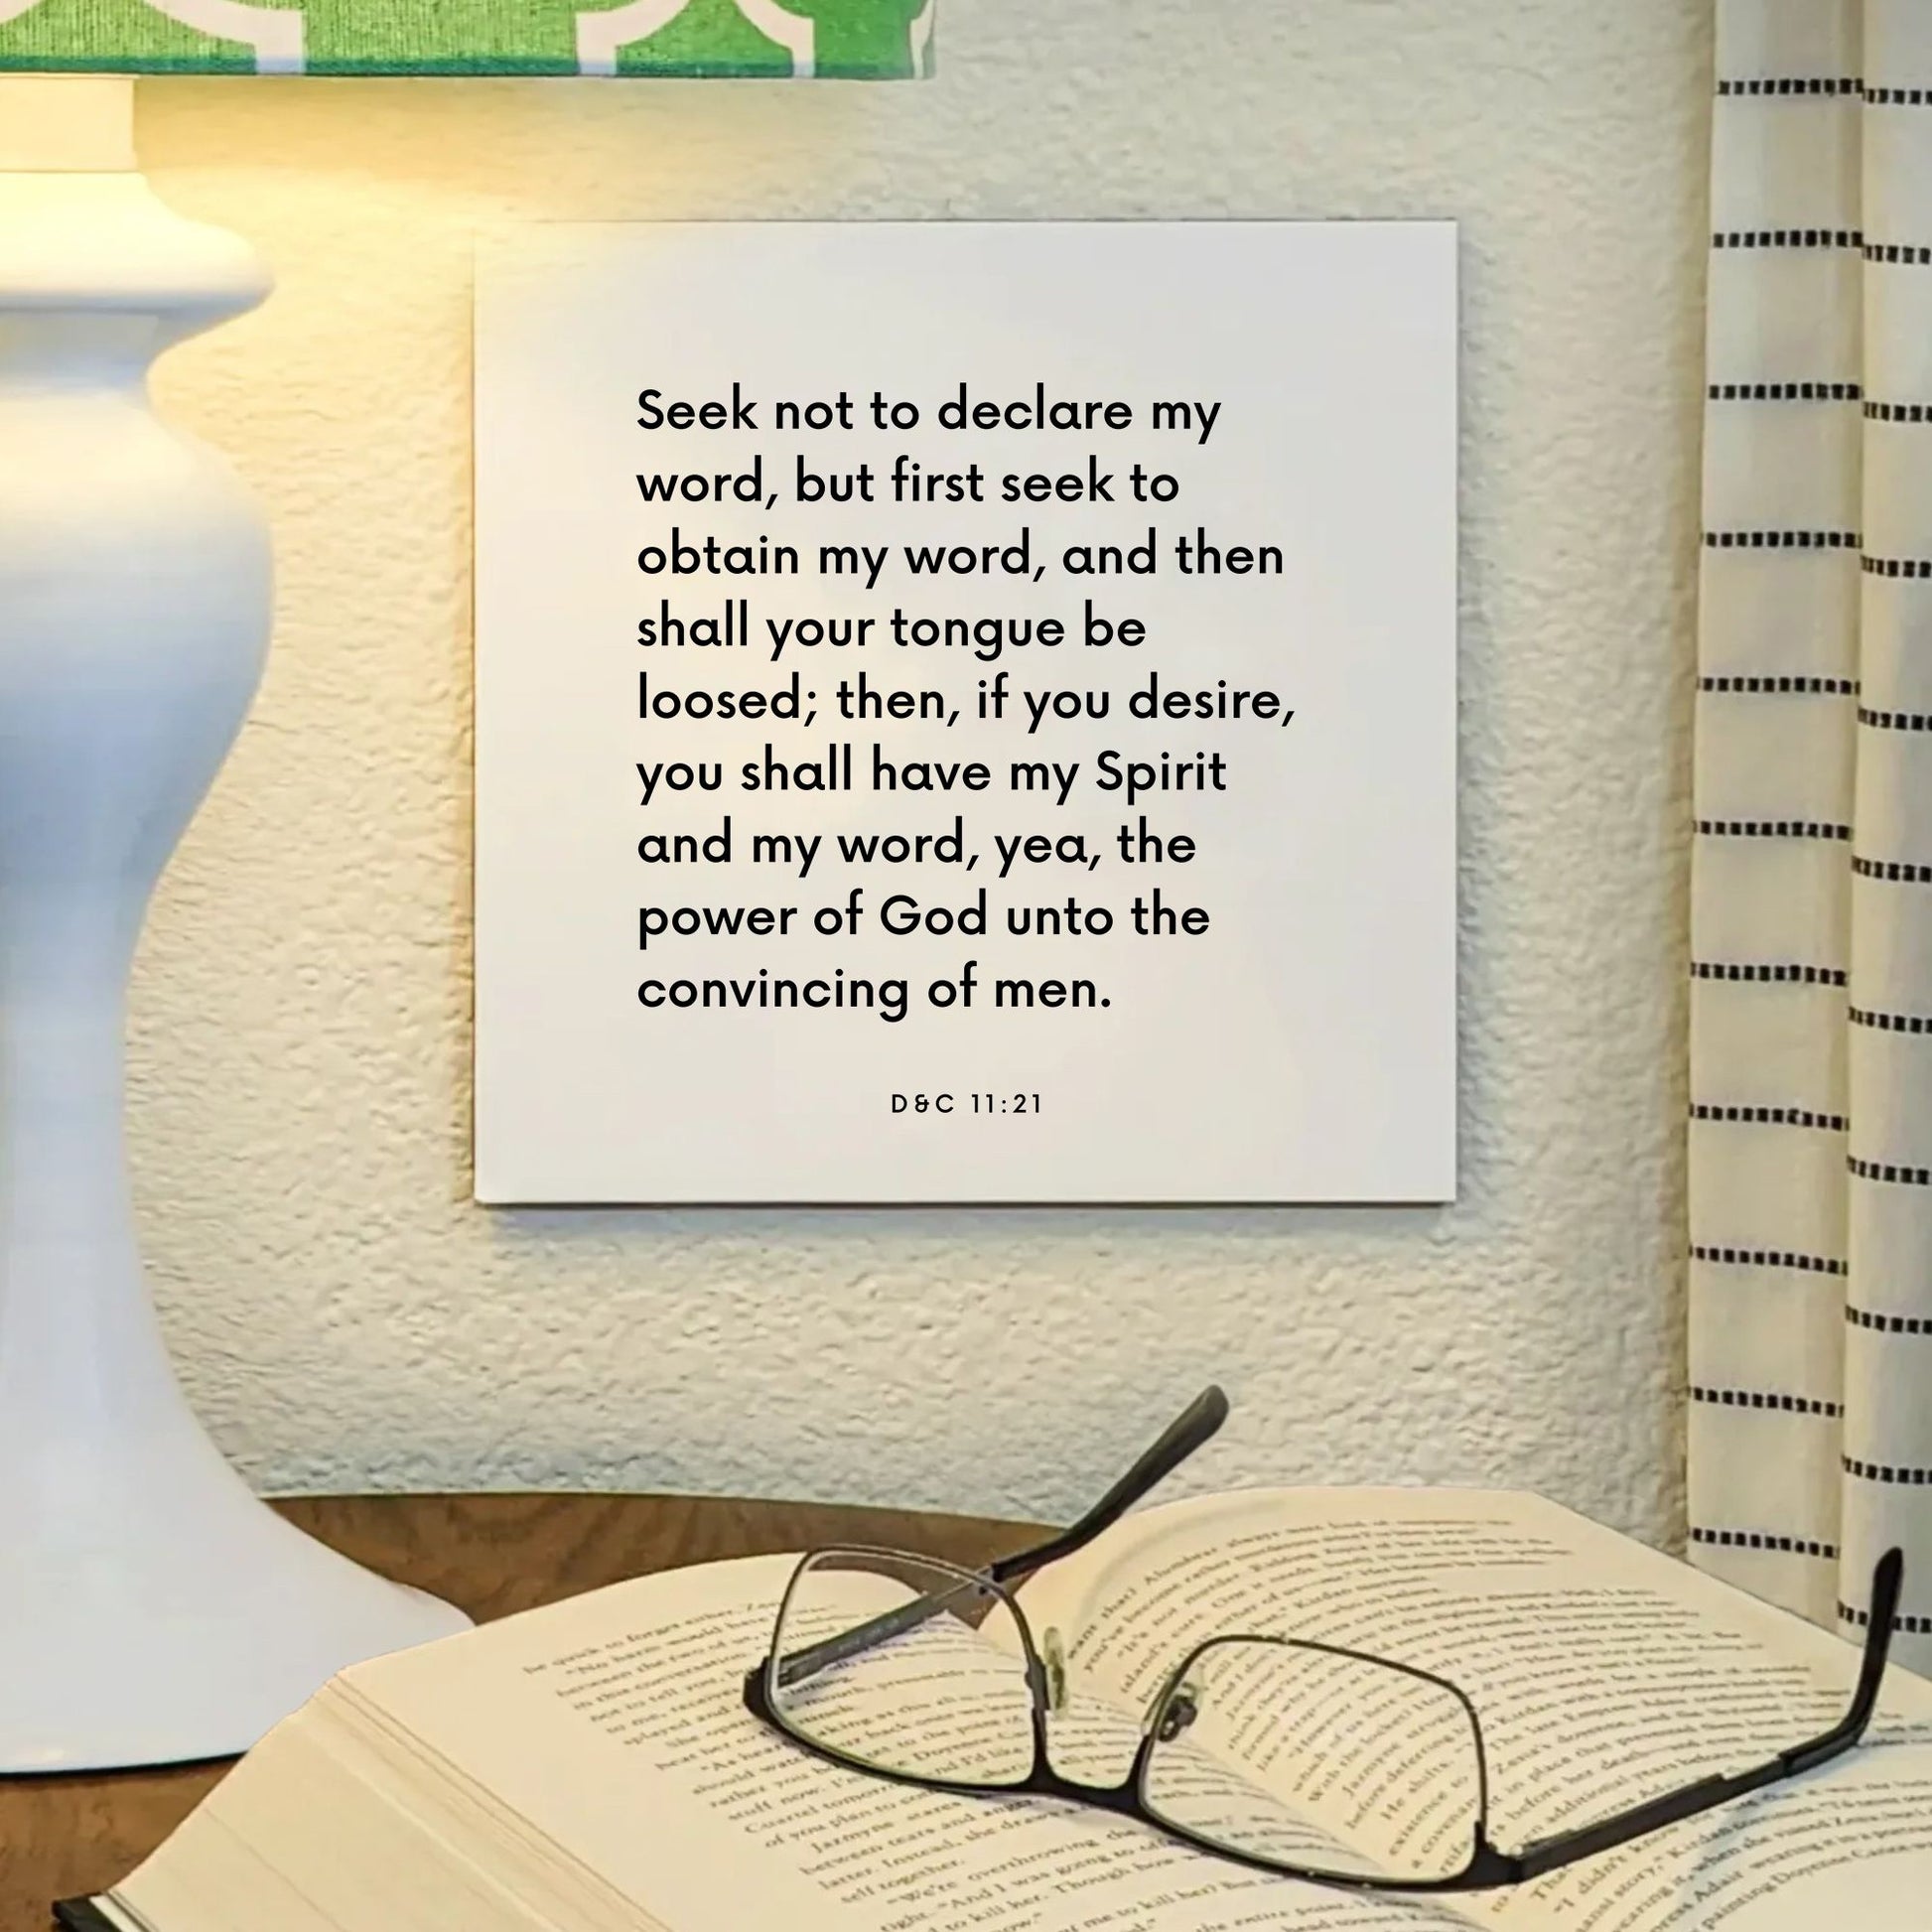 Lamp mouting of the scripture tile for D&C 11:21 - "Seek not to declare my word, but first seek to obtain my word"